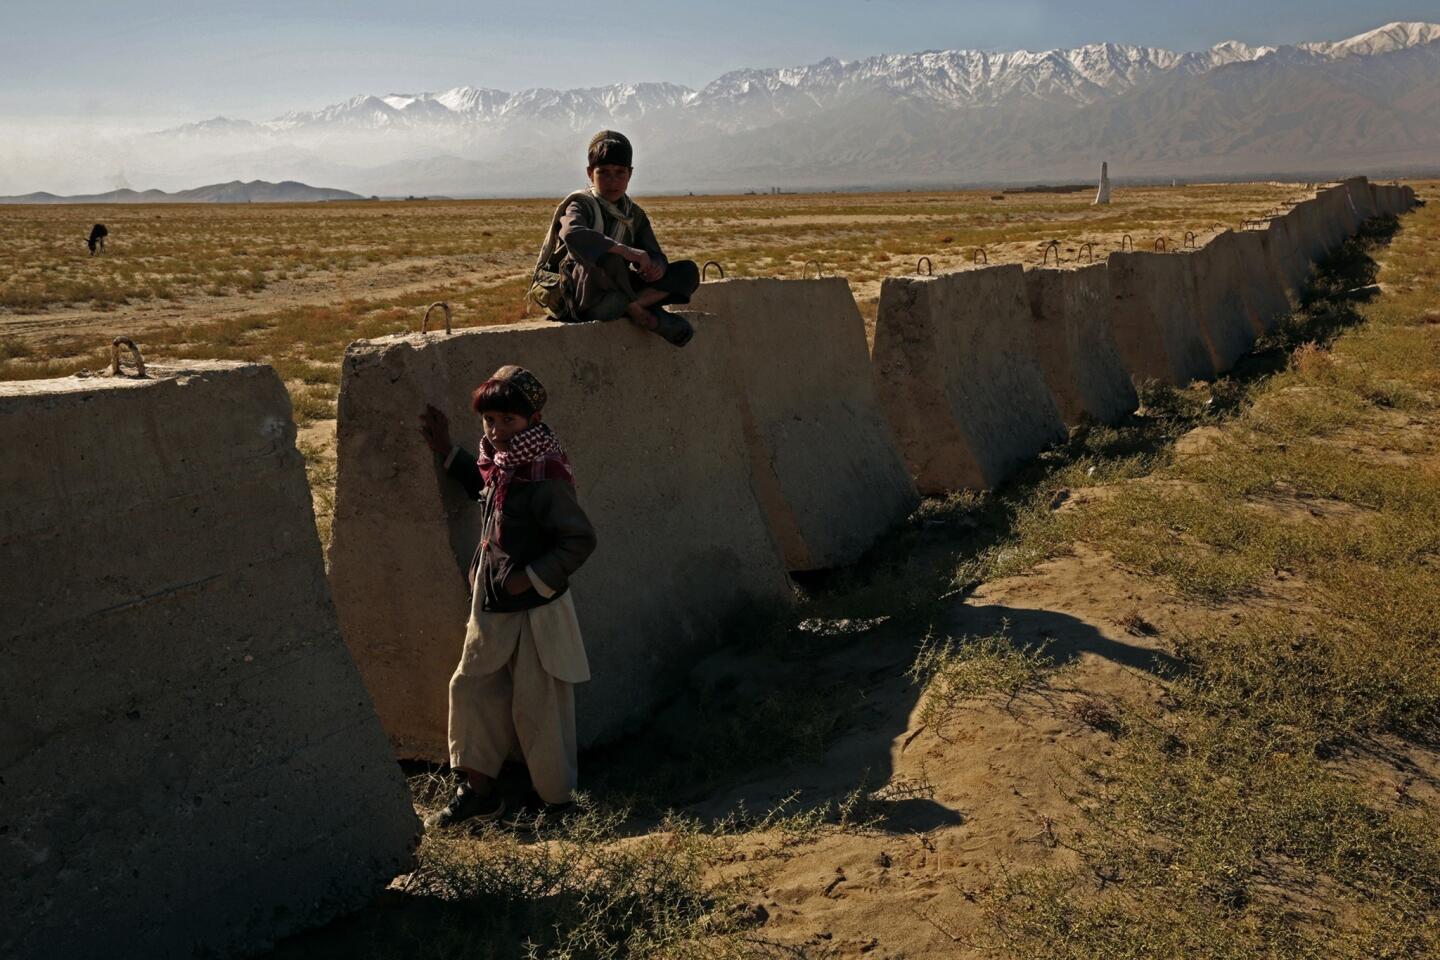 Unexploded ordnance in Afghanistan